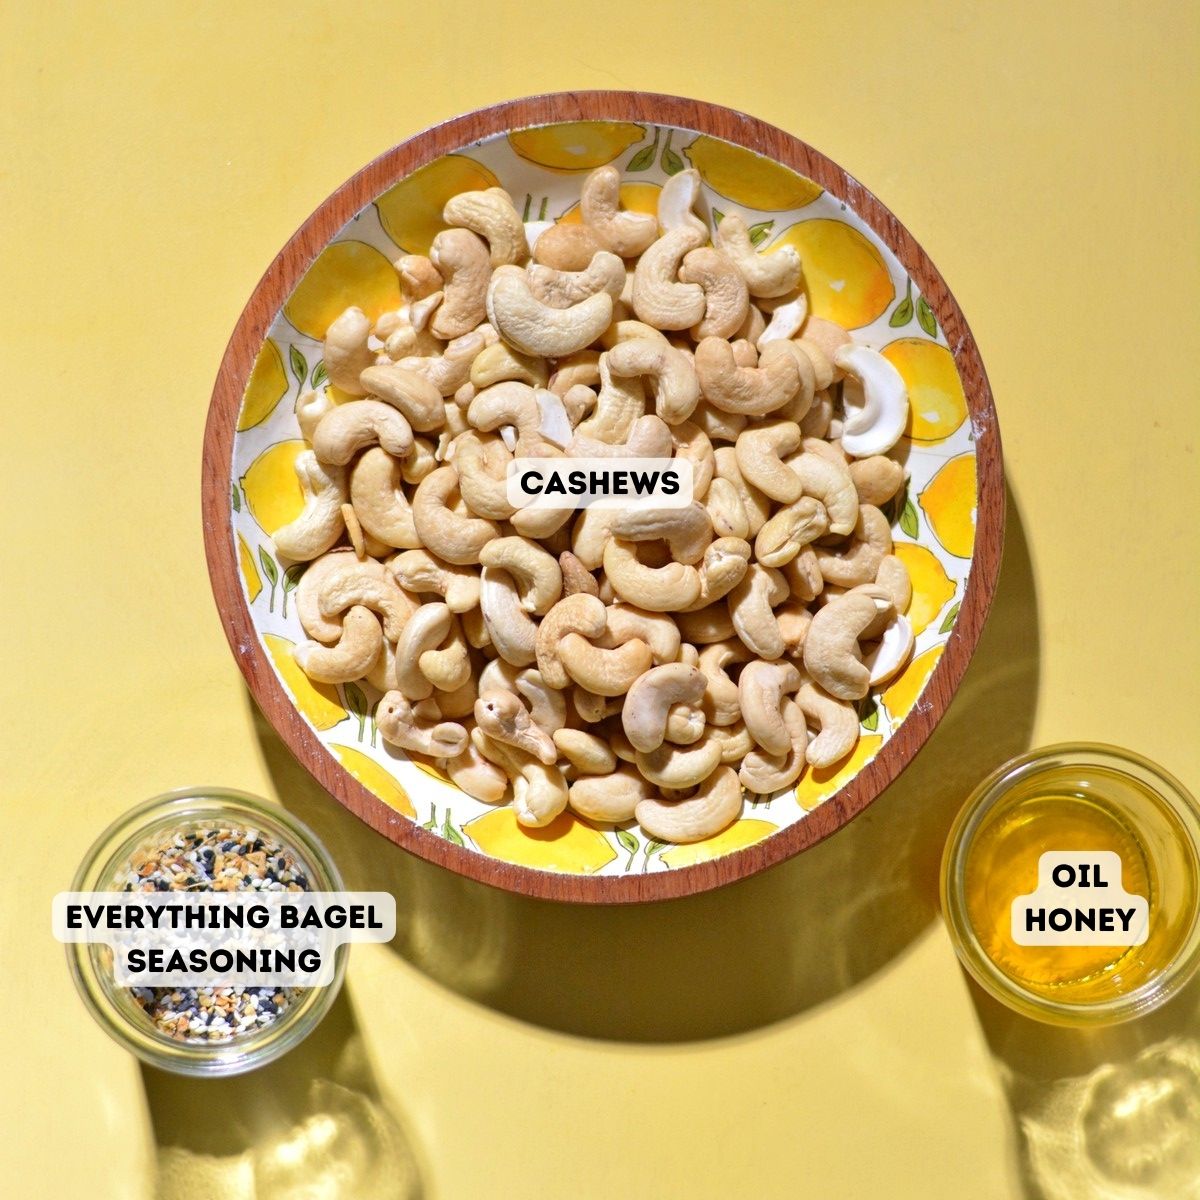 Ingredients for everything bagel cashews including raw cashews, everything bagel seasoning, honey, and oil.